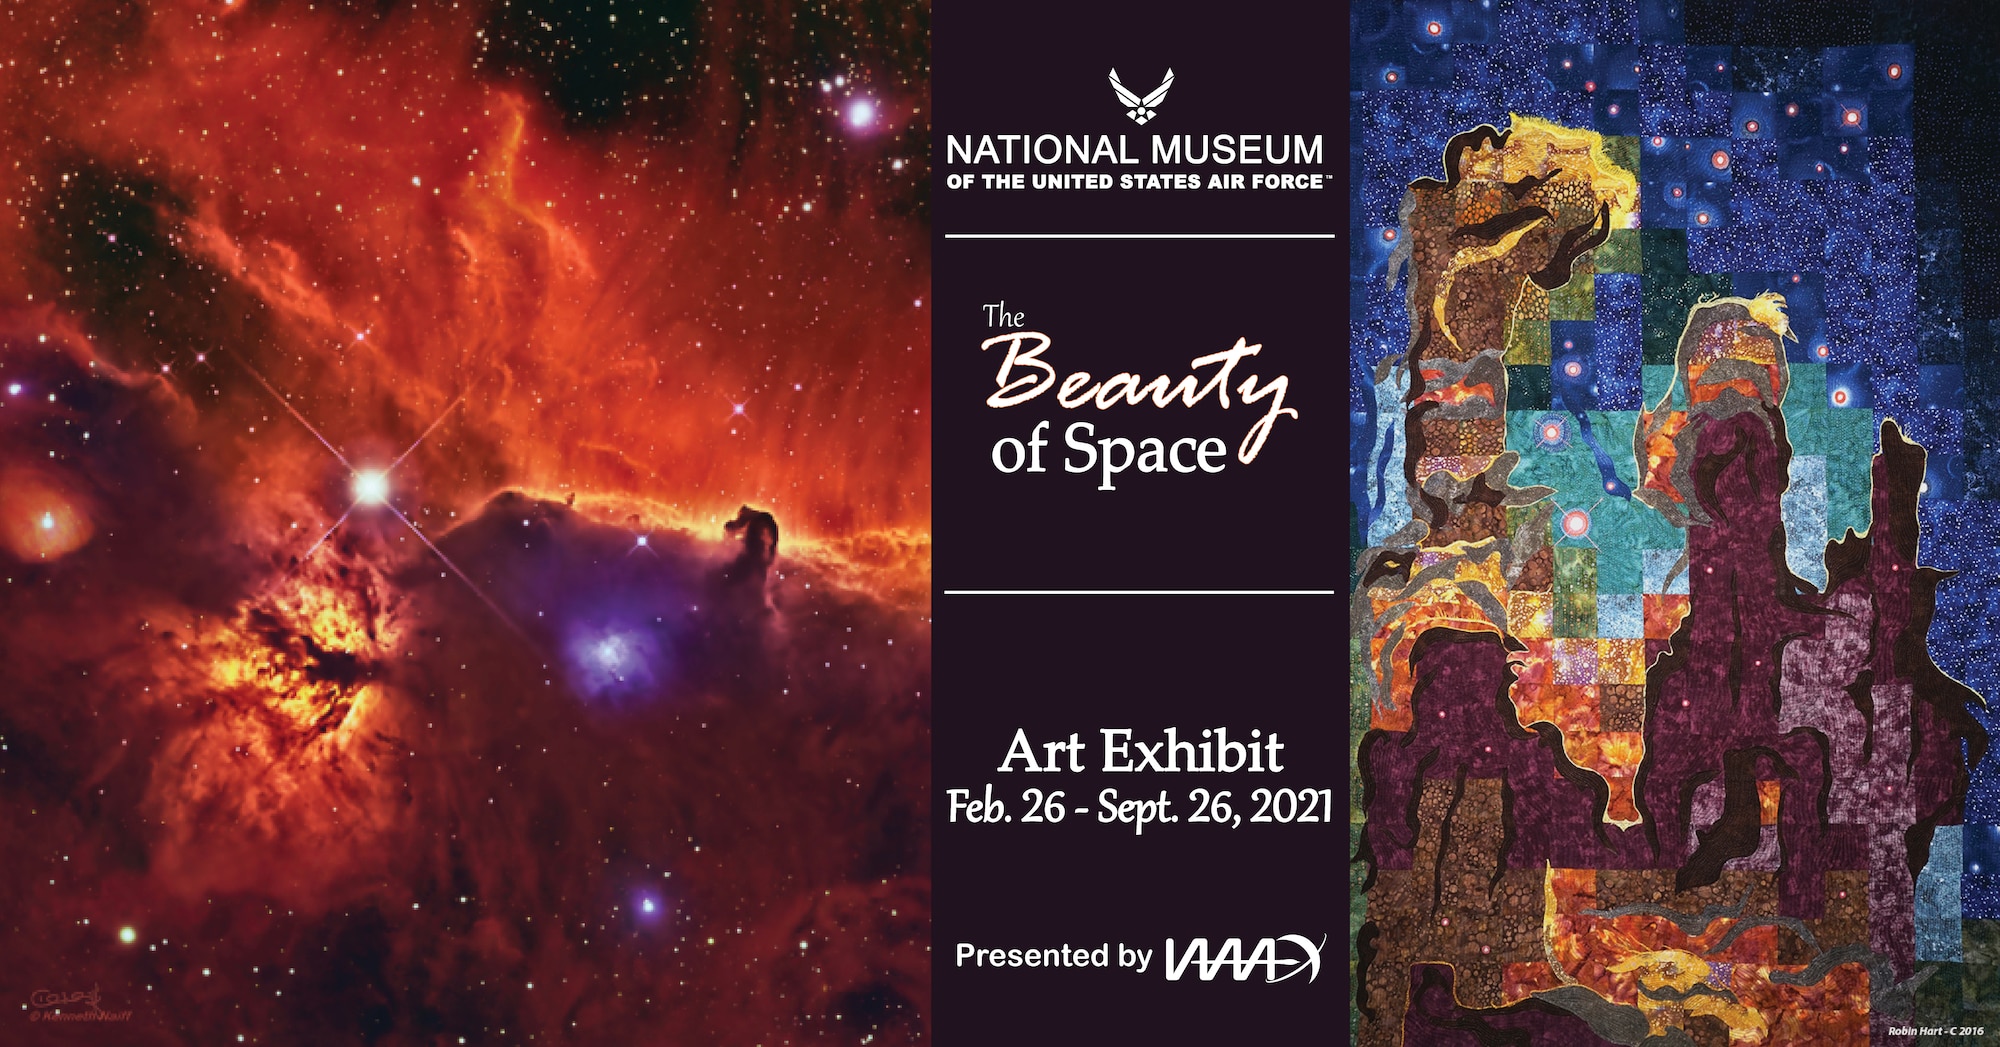 Artwork featured in the illustration include "The Pillars of Creation, A Stellar Nursery" by Robin Hart and "Horsehead and Flame Nebulae" by Kenneth Naiff.